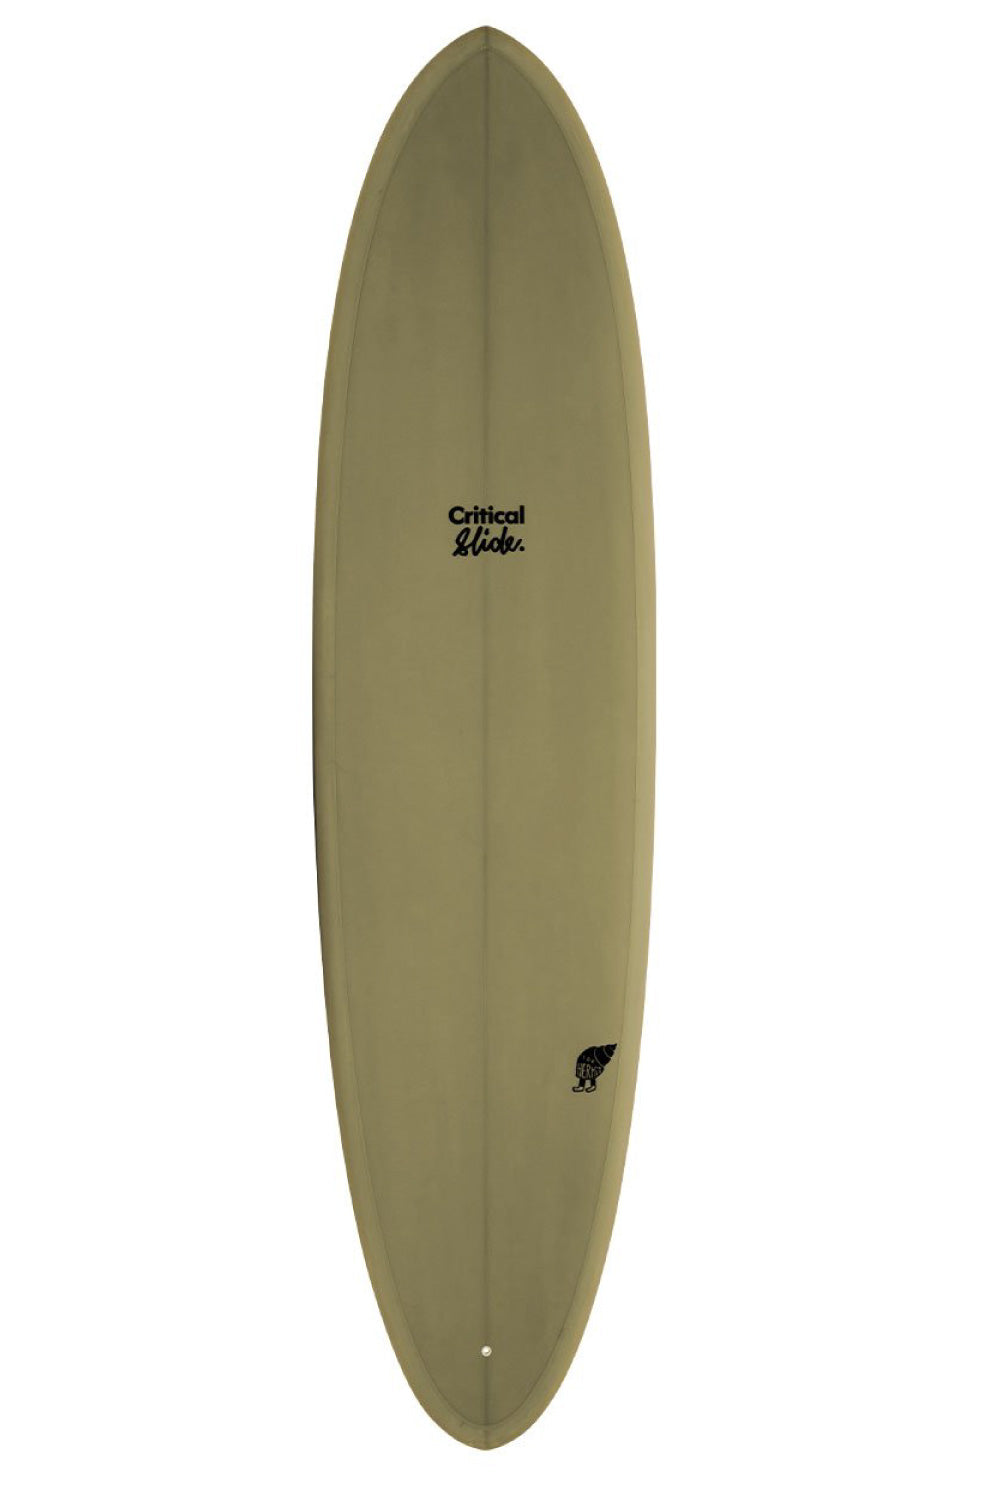 The Critical Slide Society Hermit PU Mid Length Surfboard